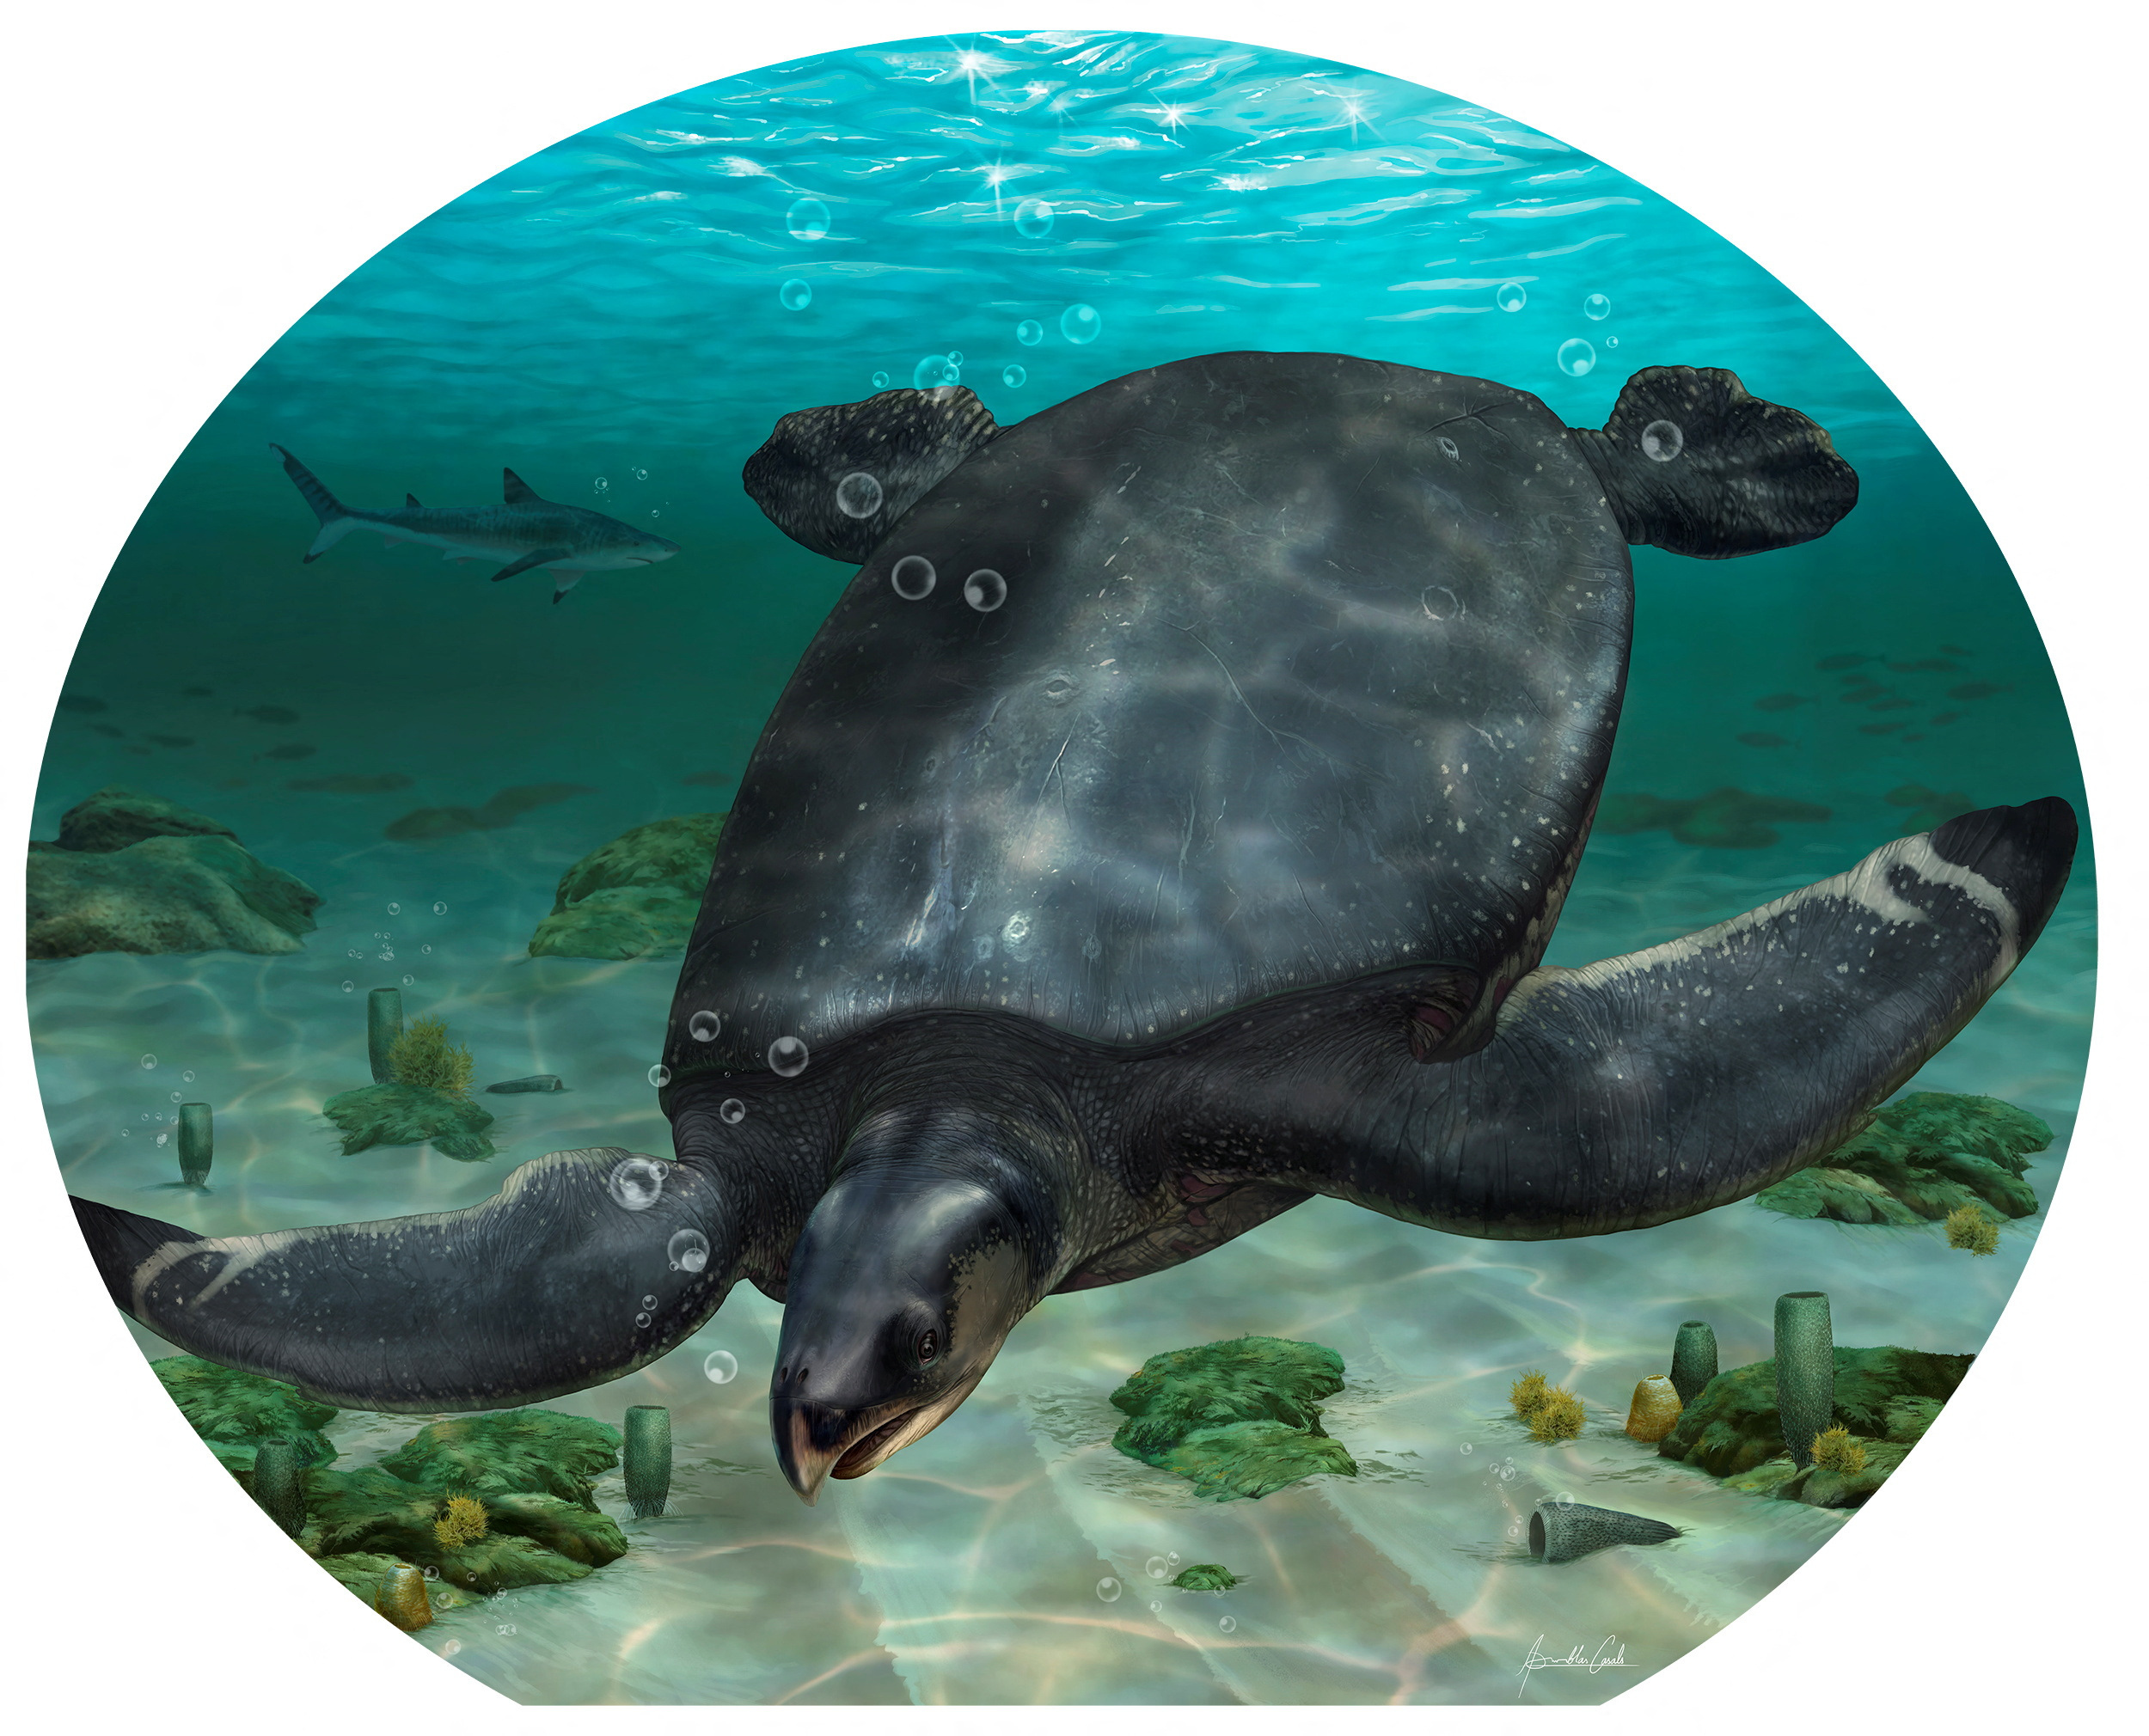 Illustrated reconstruction of the large Cretaceous sea turtle Leviathanochelys aenigmatica